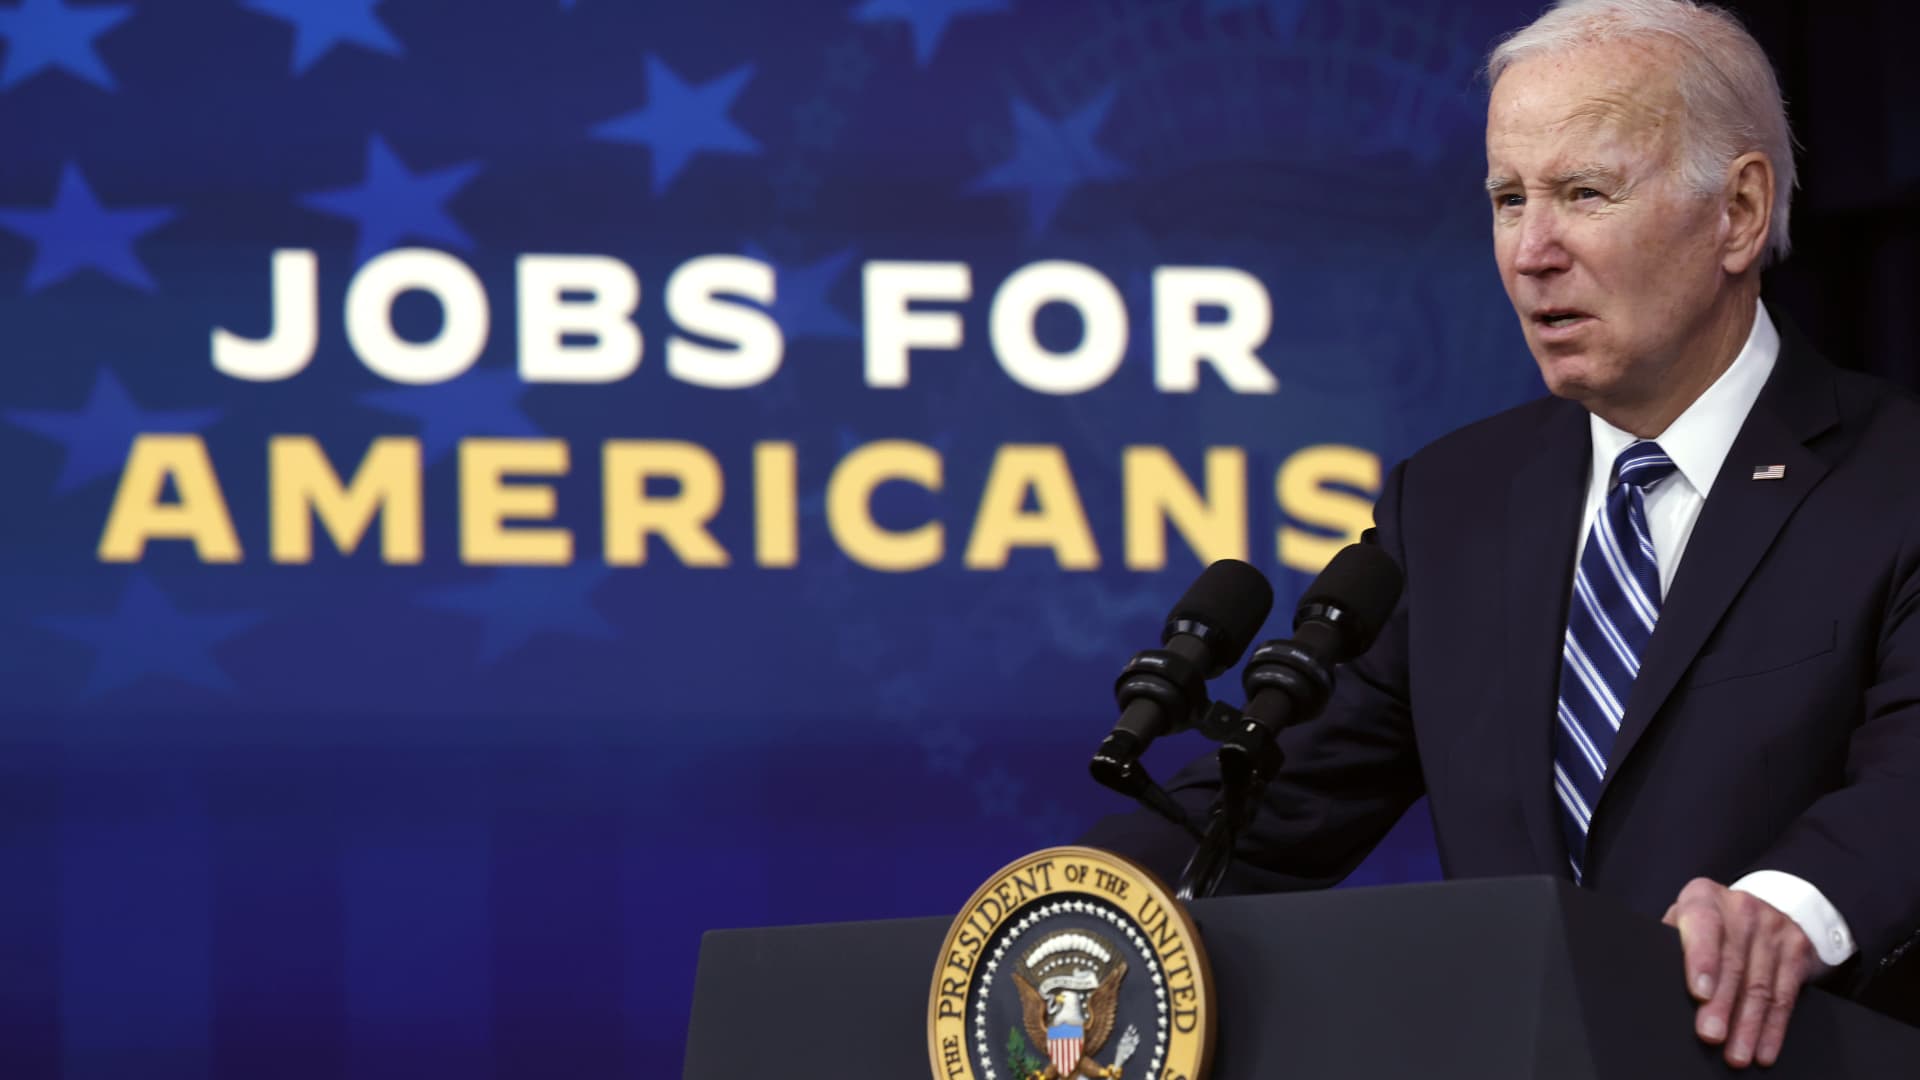 US President Joe Biden delivers remarks about the latest jobs report in the South Court Auditorium in the Eisenhower Executive Office Building on February 03, 2023 in Washington, DC.